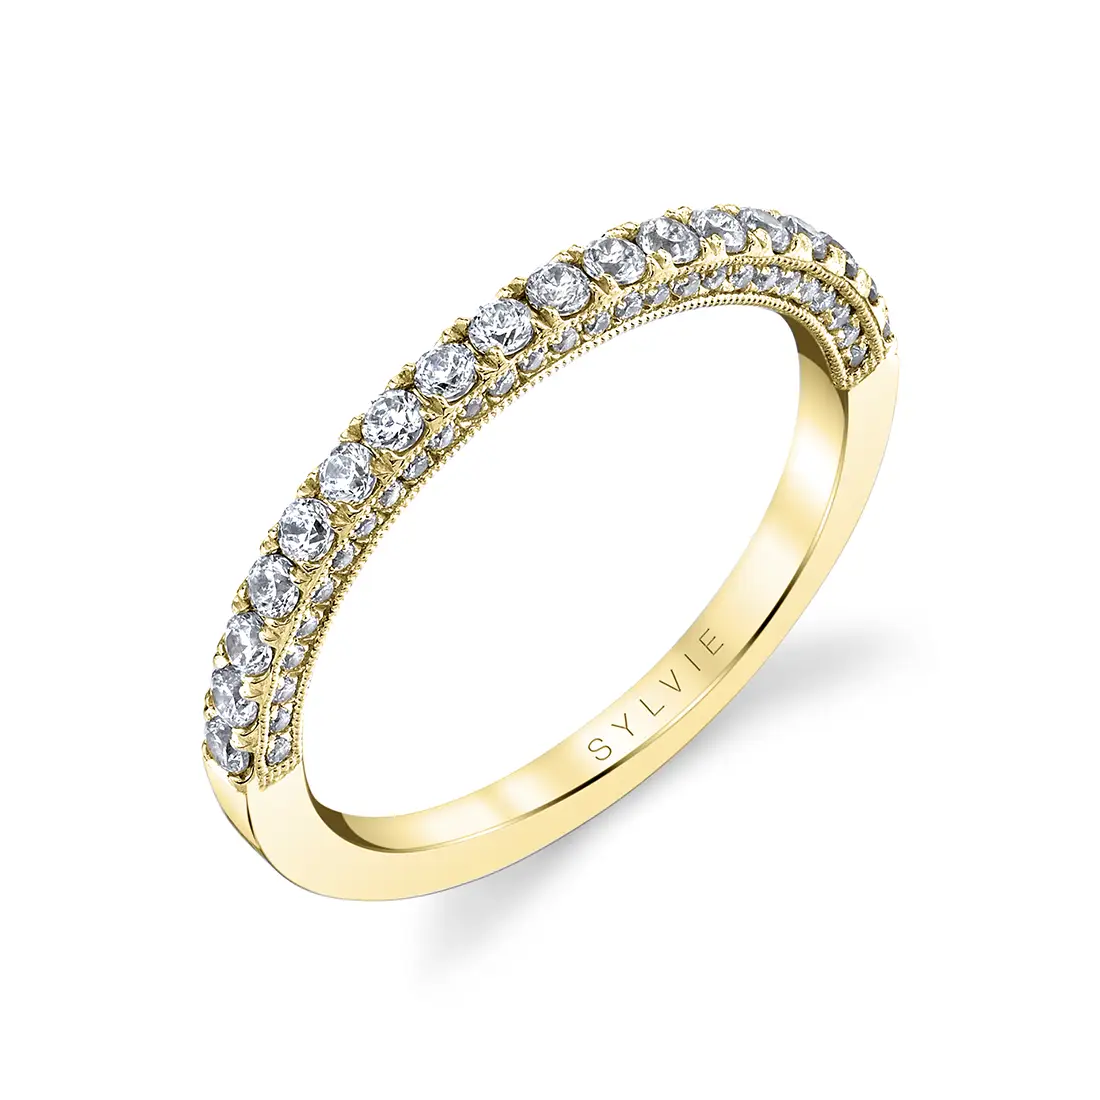 Round Cut Wedding Band With Diamonds On The Side - Marianne